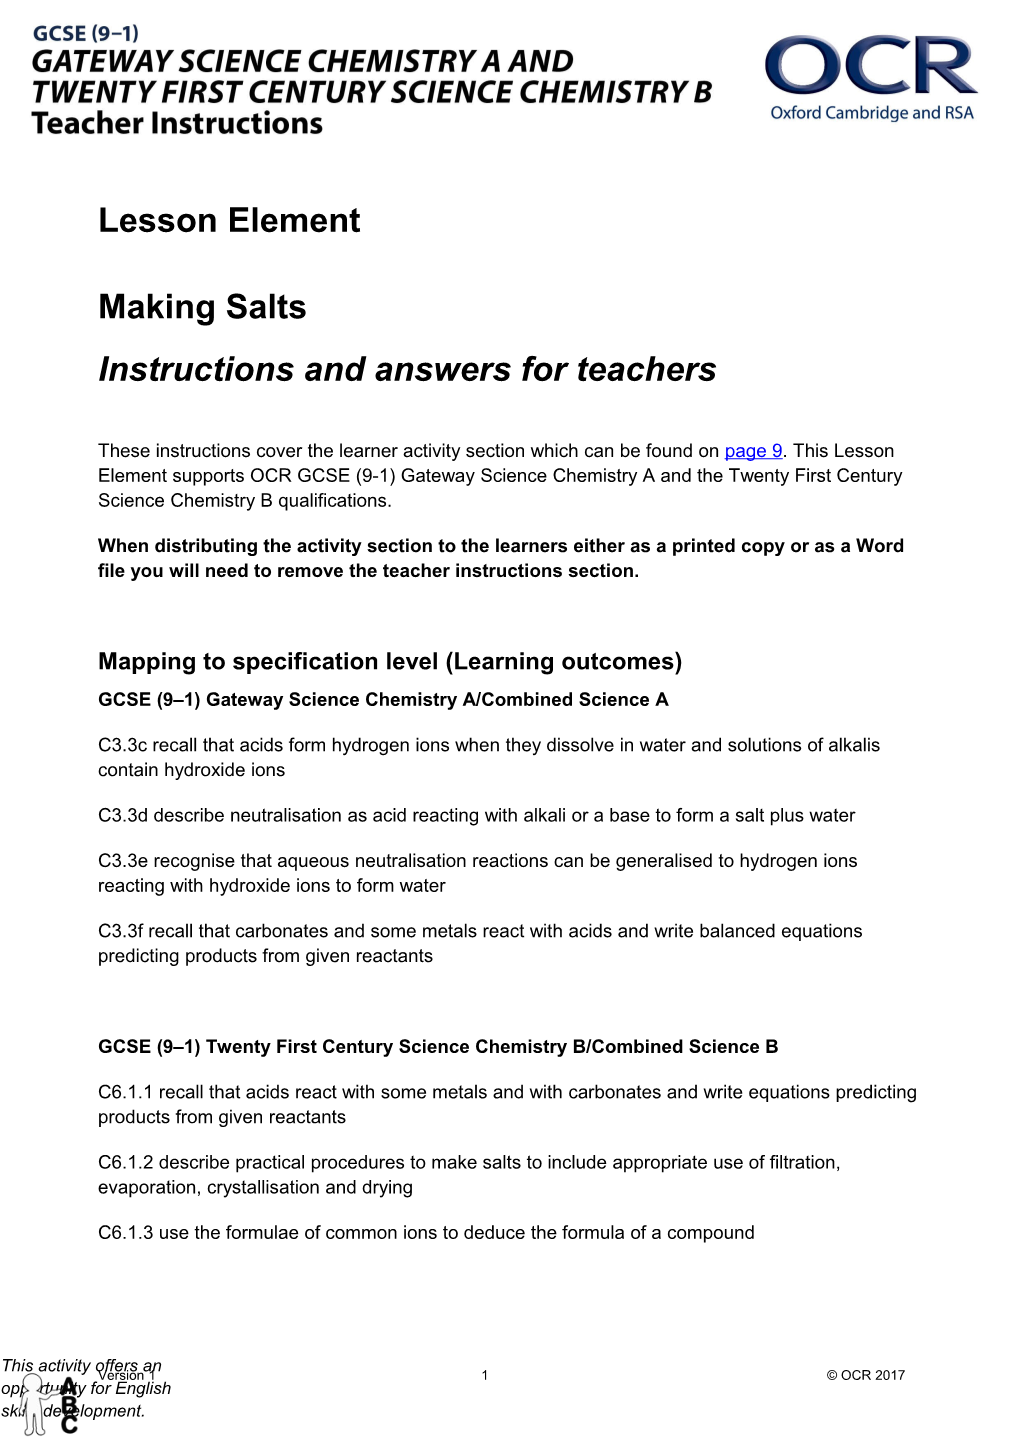 OCR GCSE (9-1) Gateway Science Chemistry a and Twenty First Century Science B Lesson Element